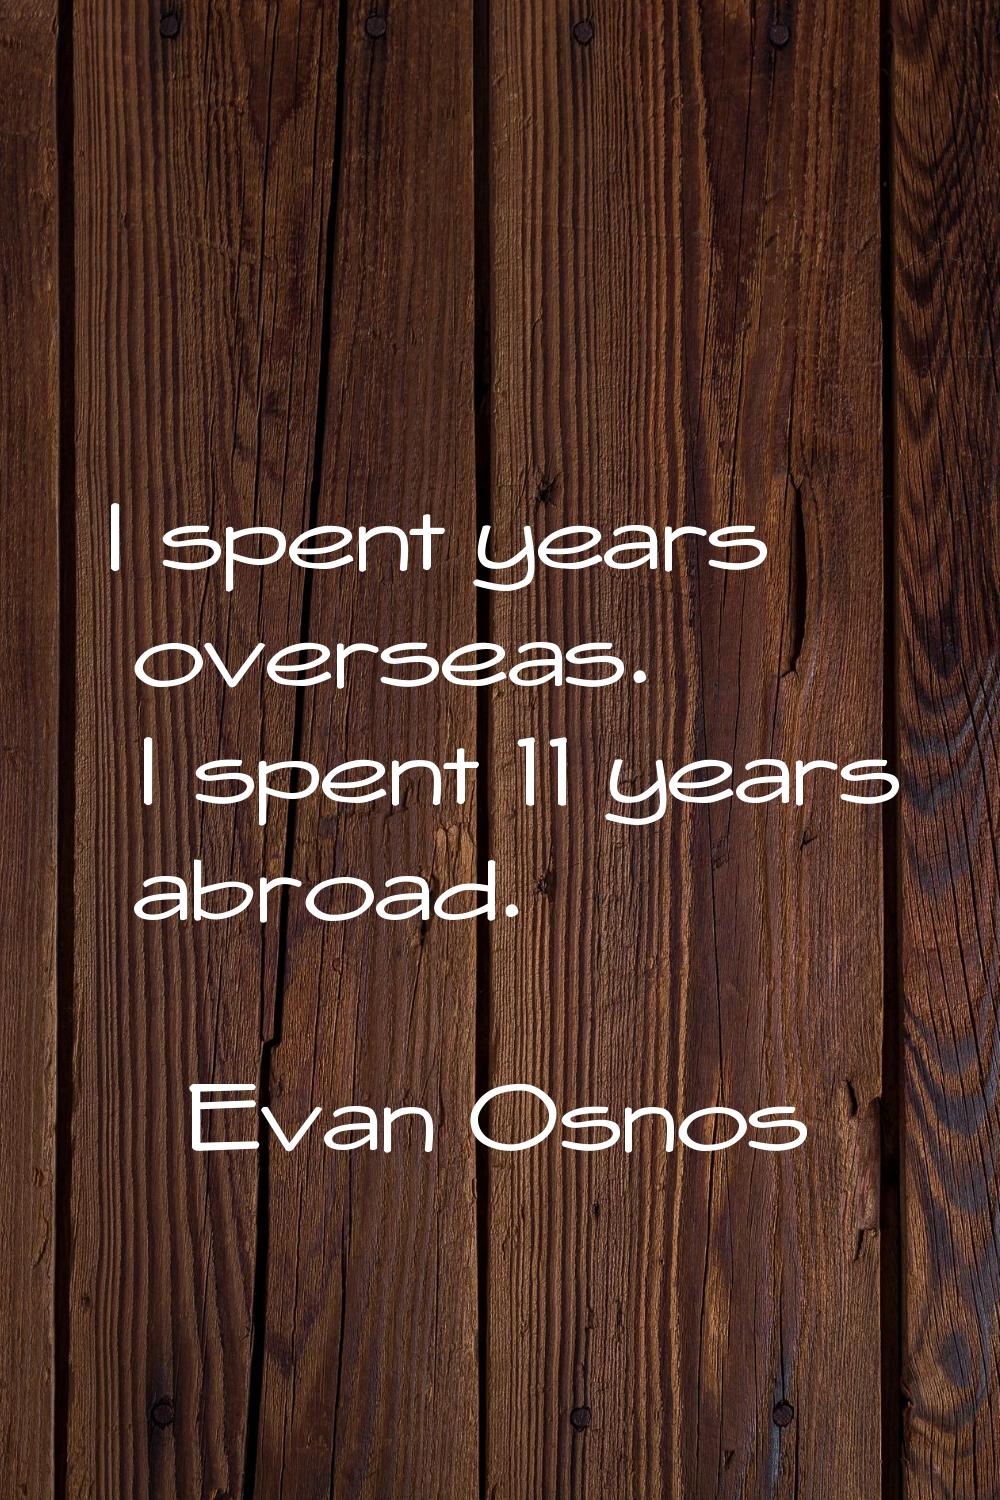 I spent years overseas. I spent 11 years abroad.